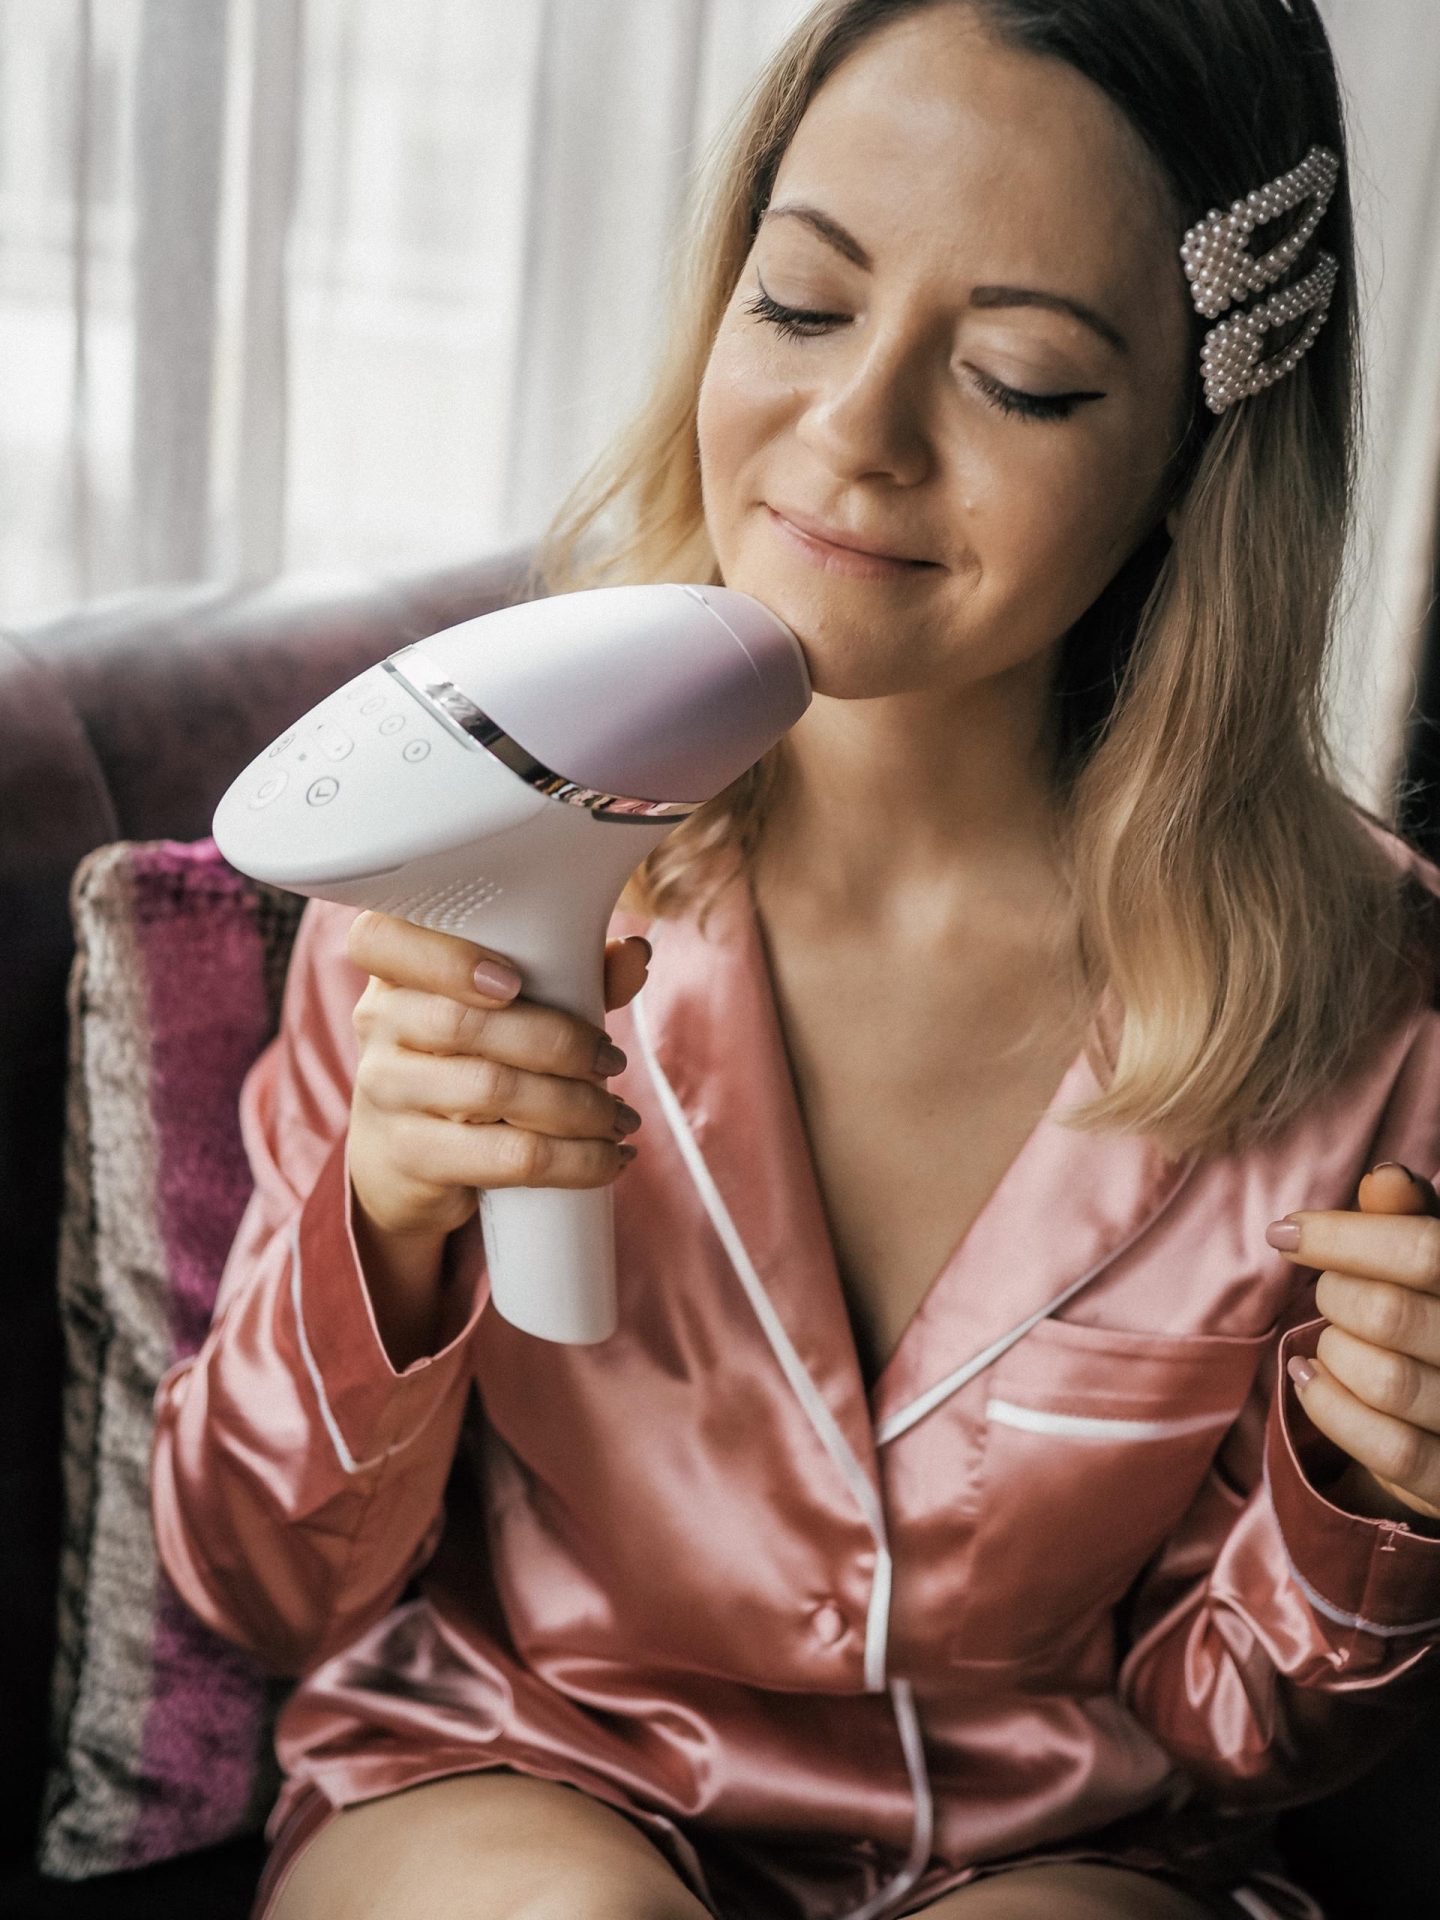 Philips Lumea Prestige review and at home IPL